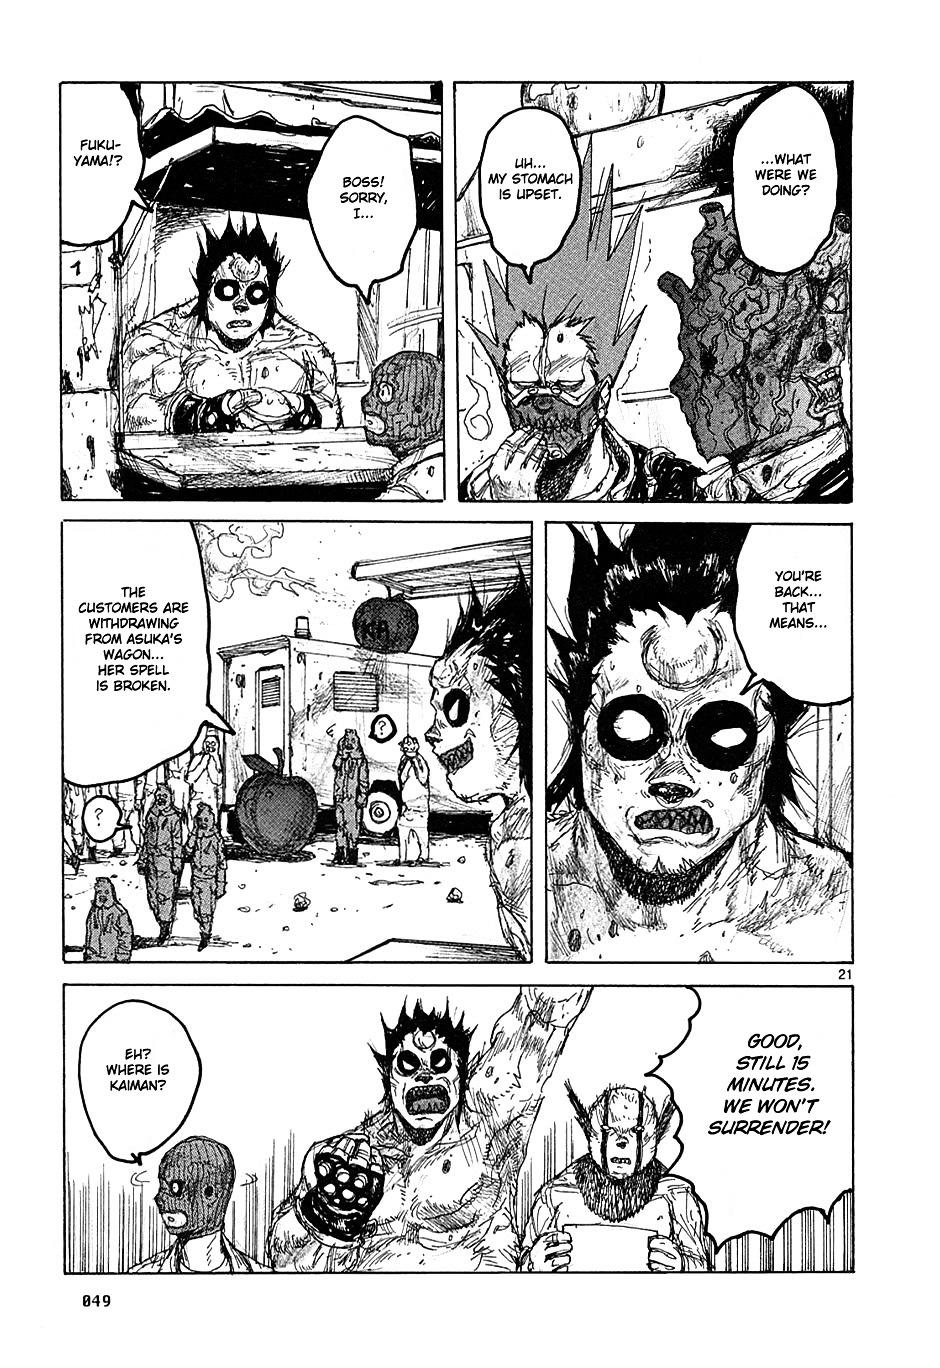 Dorohedoro Chapter 38 : Meatbags Free For All page 21 - Mangakakalot